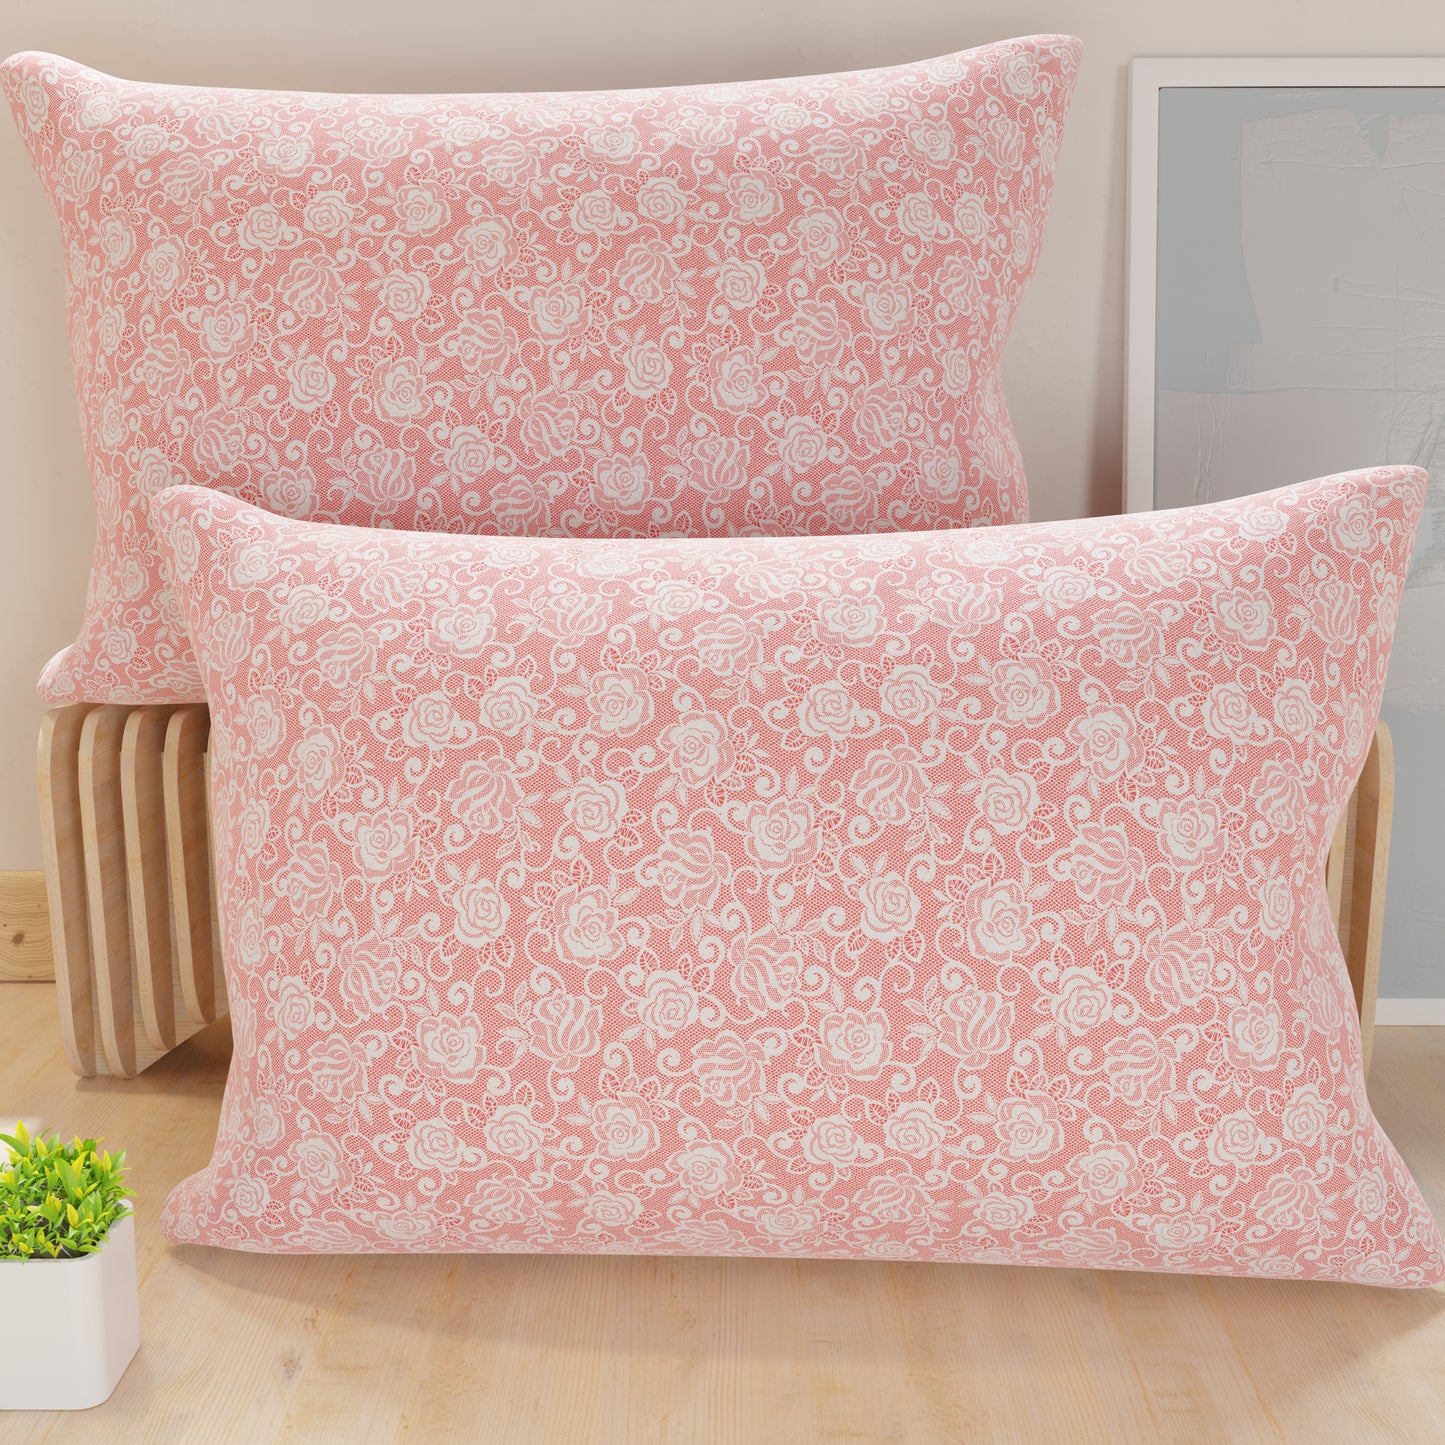 Pillowcases, Cushion Covers in Digital Print, Pink Lace